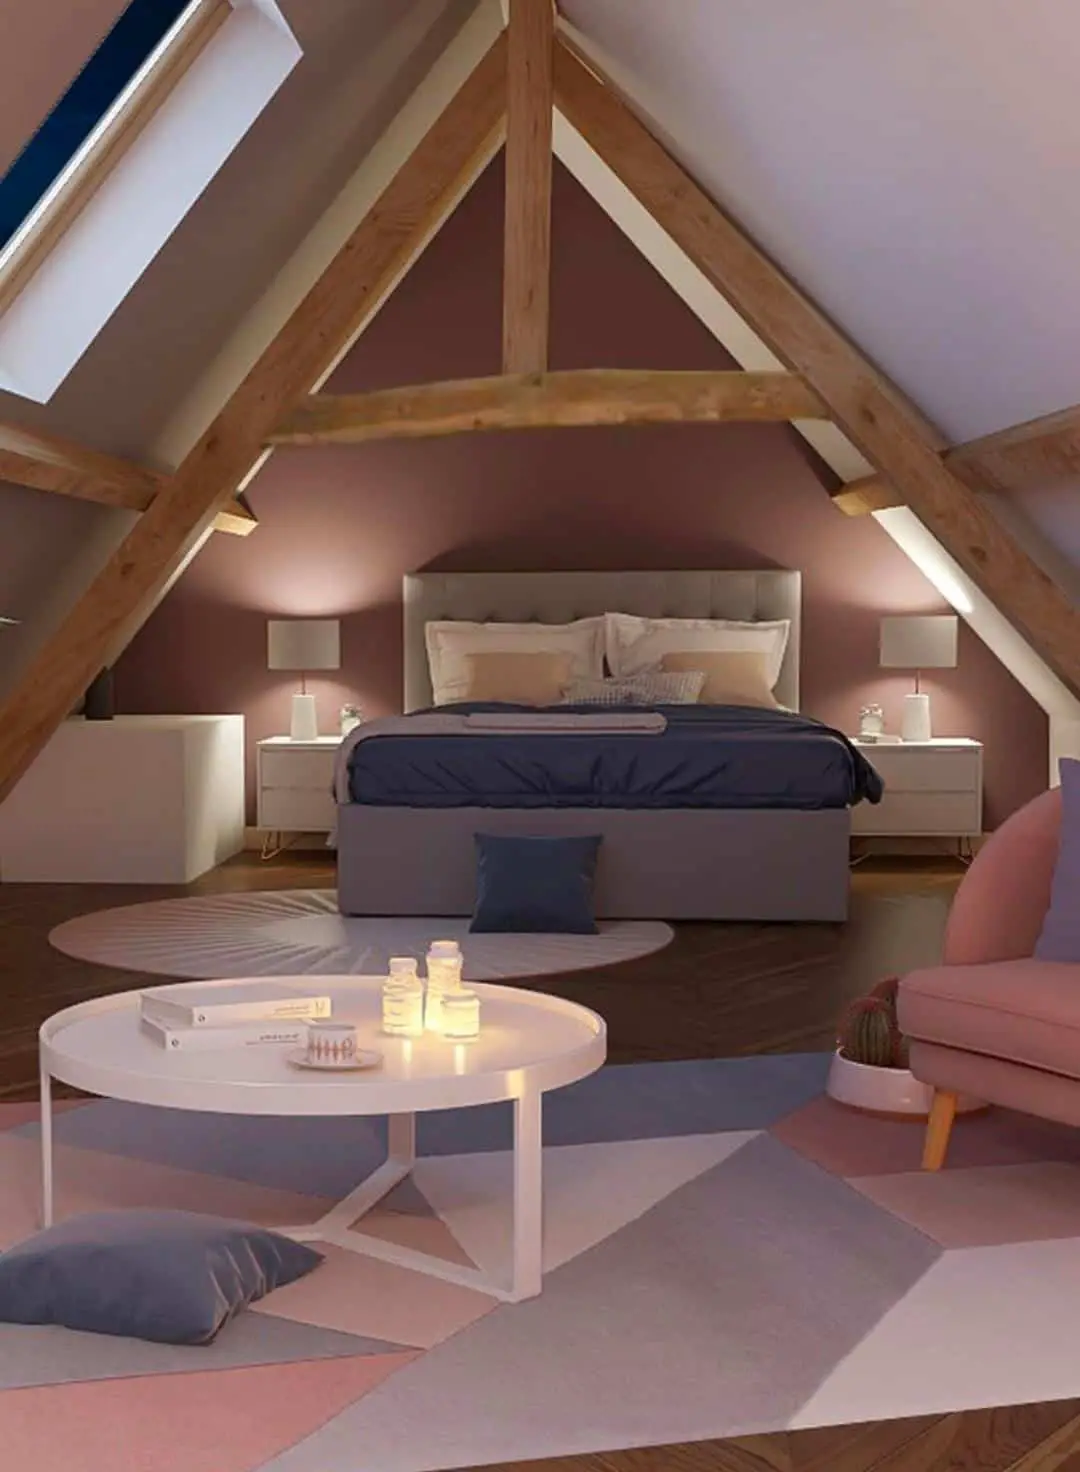 converted attic space for an ADU